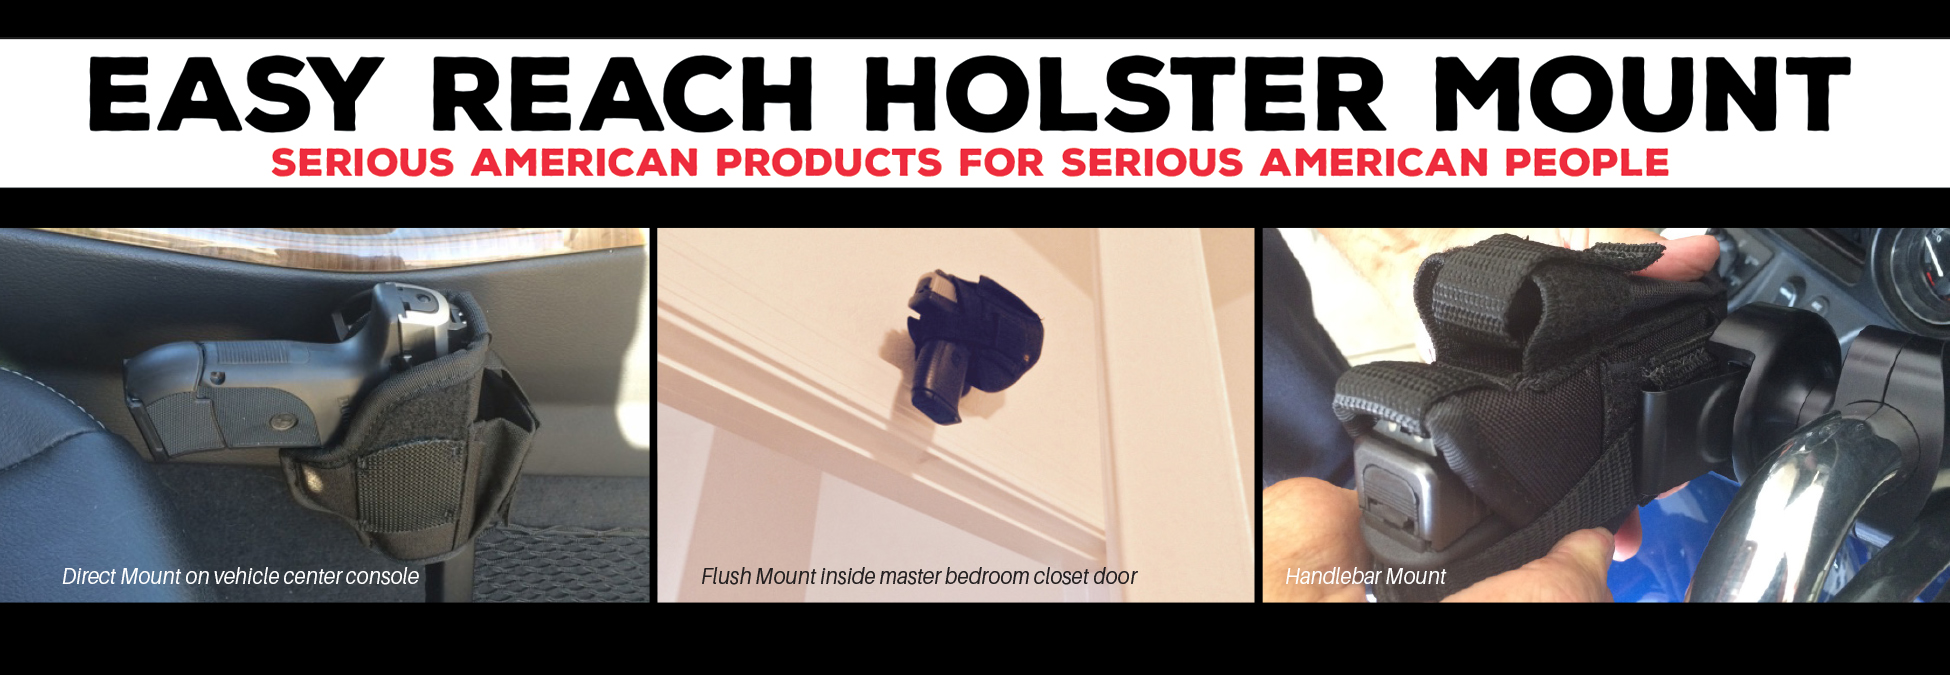 Easy Reach Holster Mount Products